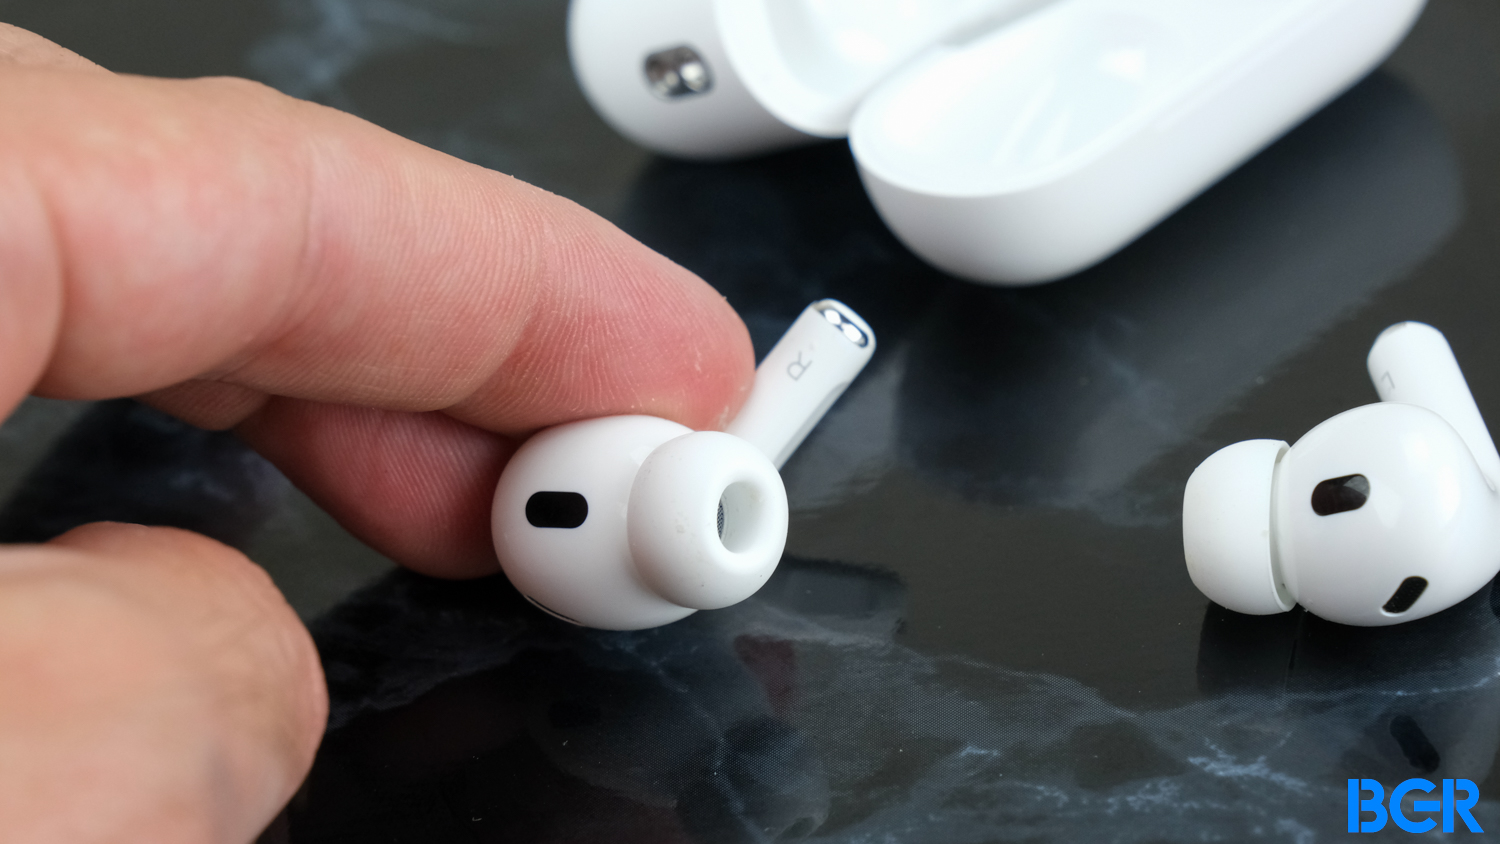 Apple just upgraded AirPods Pro 2 with these 6 new features